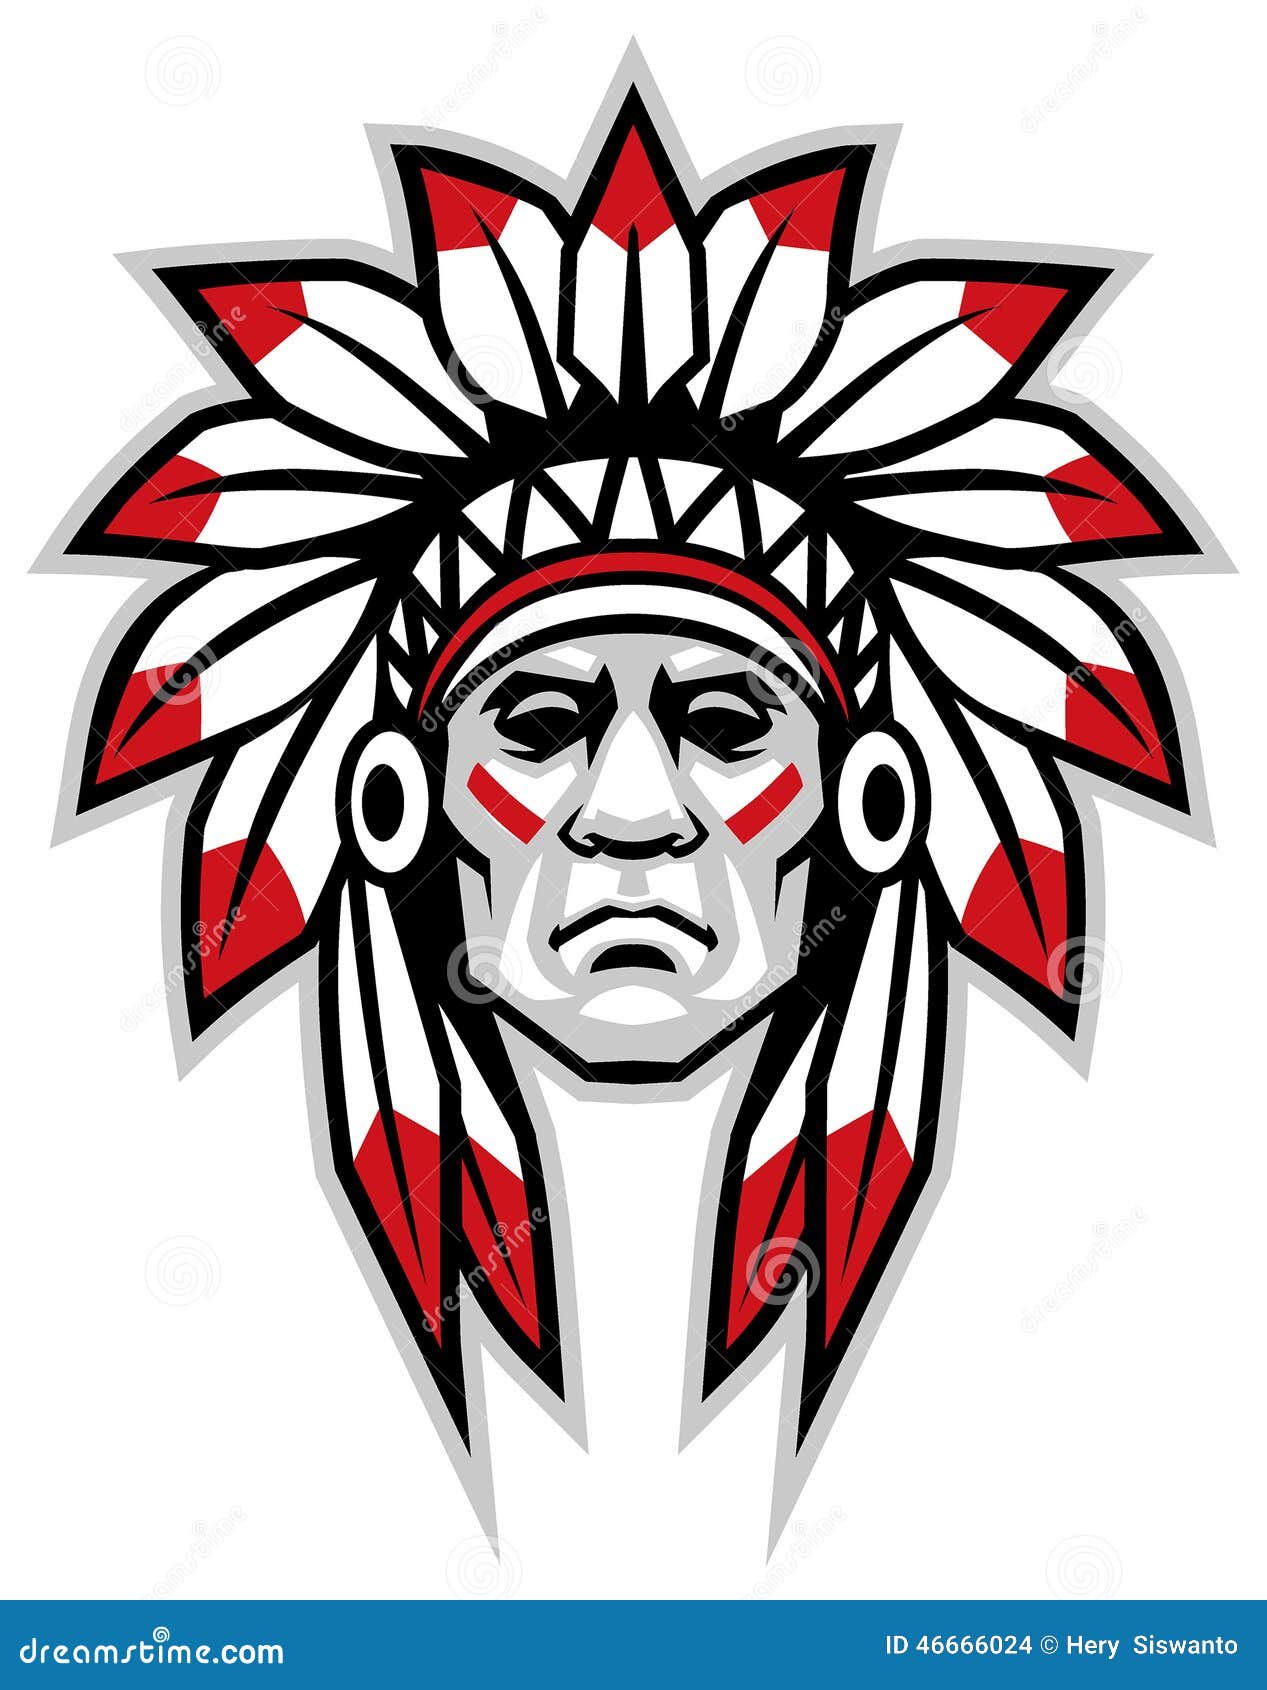 indian chief